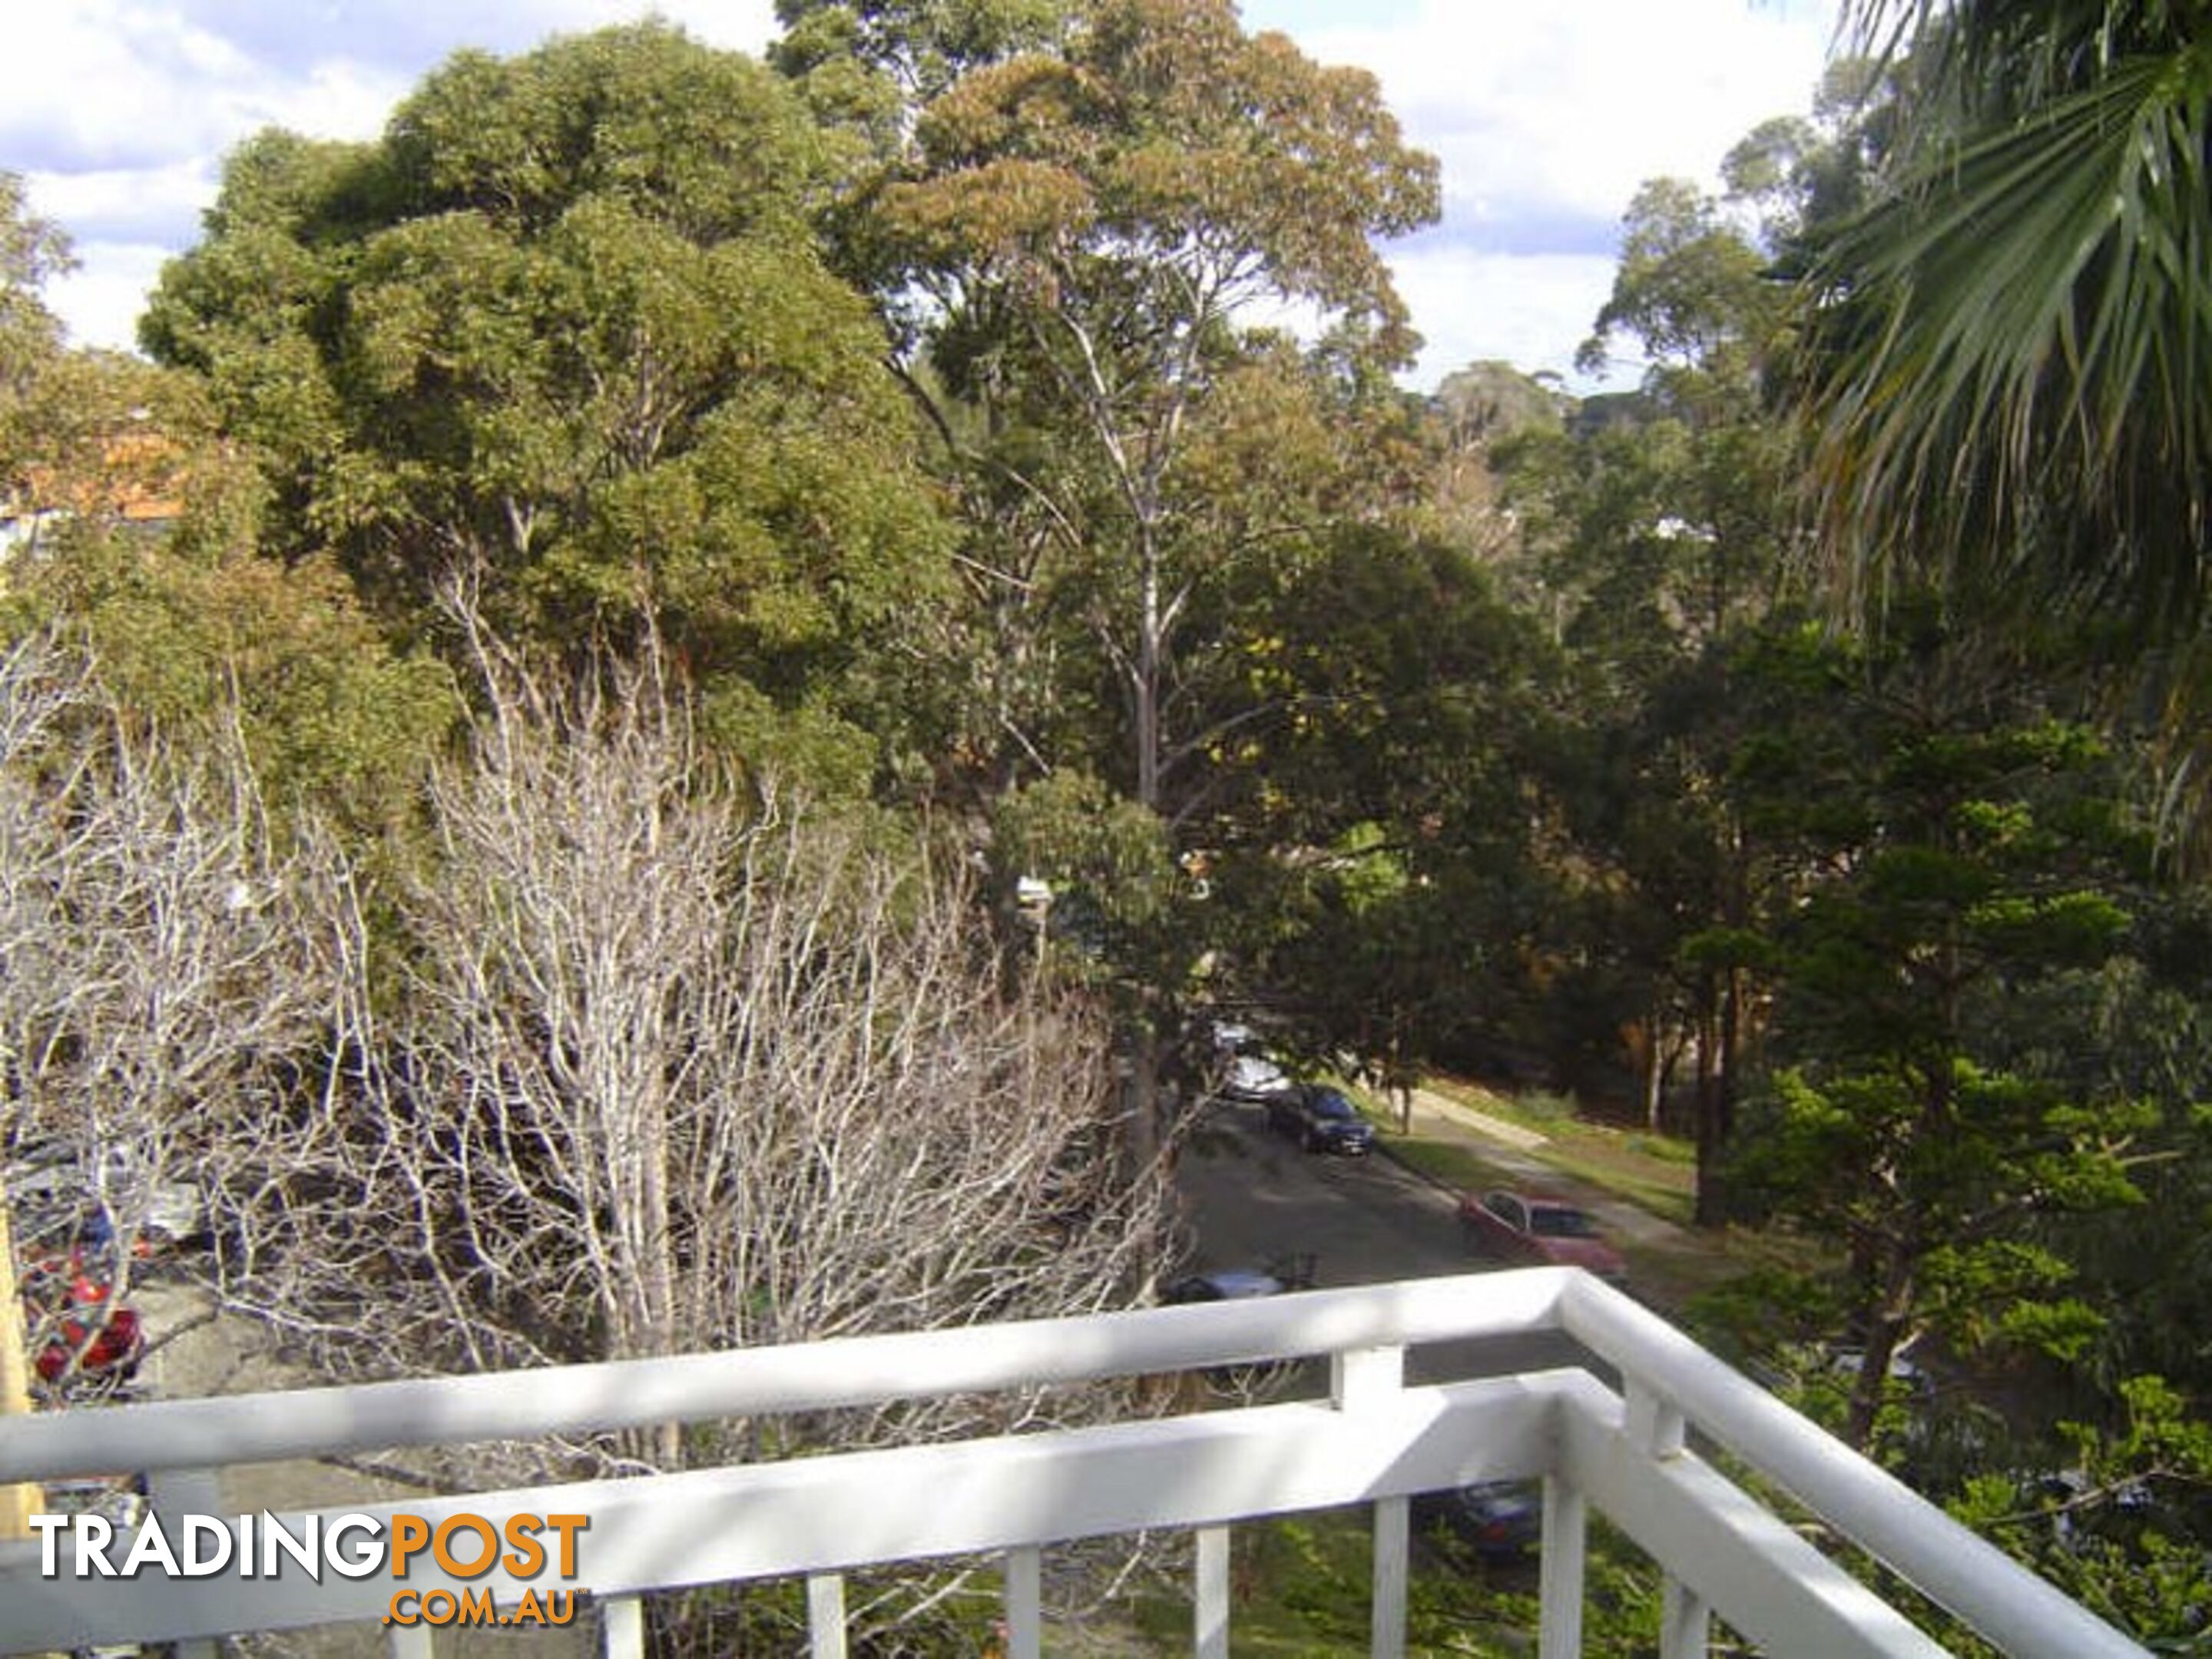 60/450 Pacific Hwy LANE COVE NSW 2066